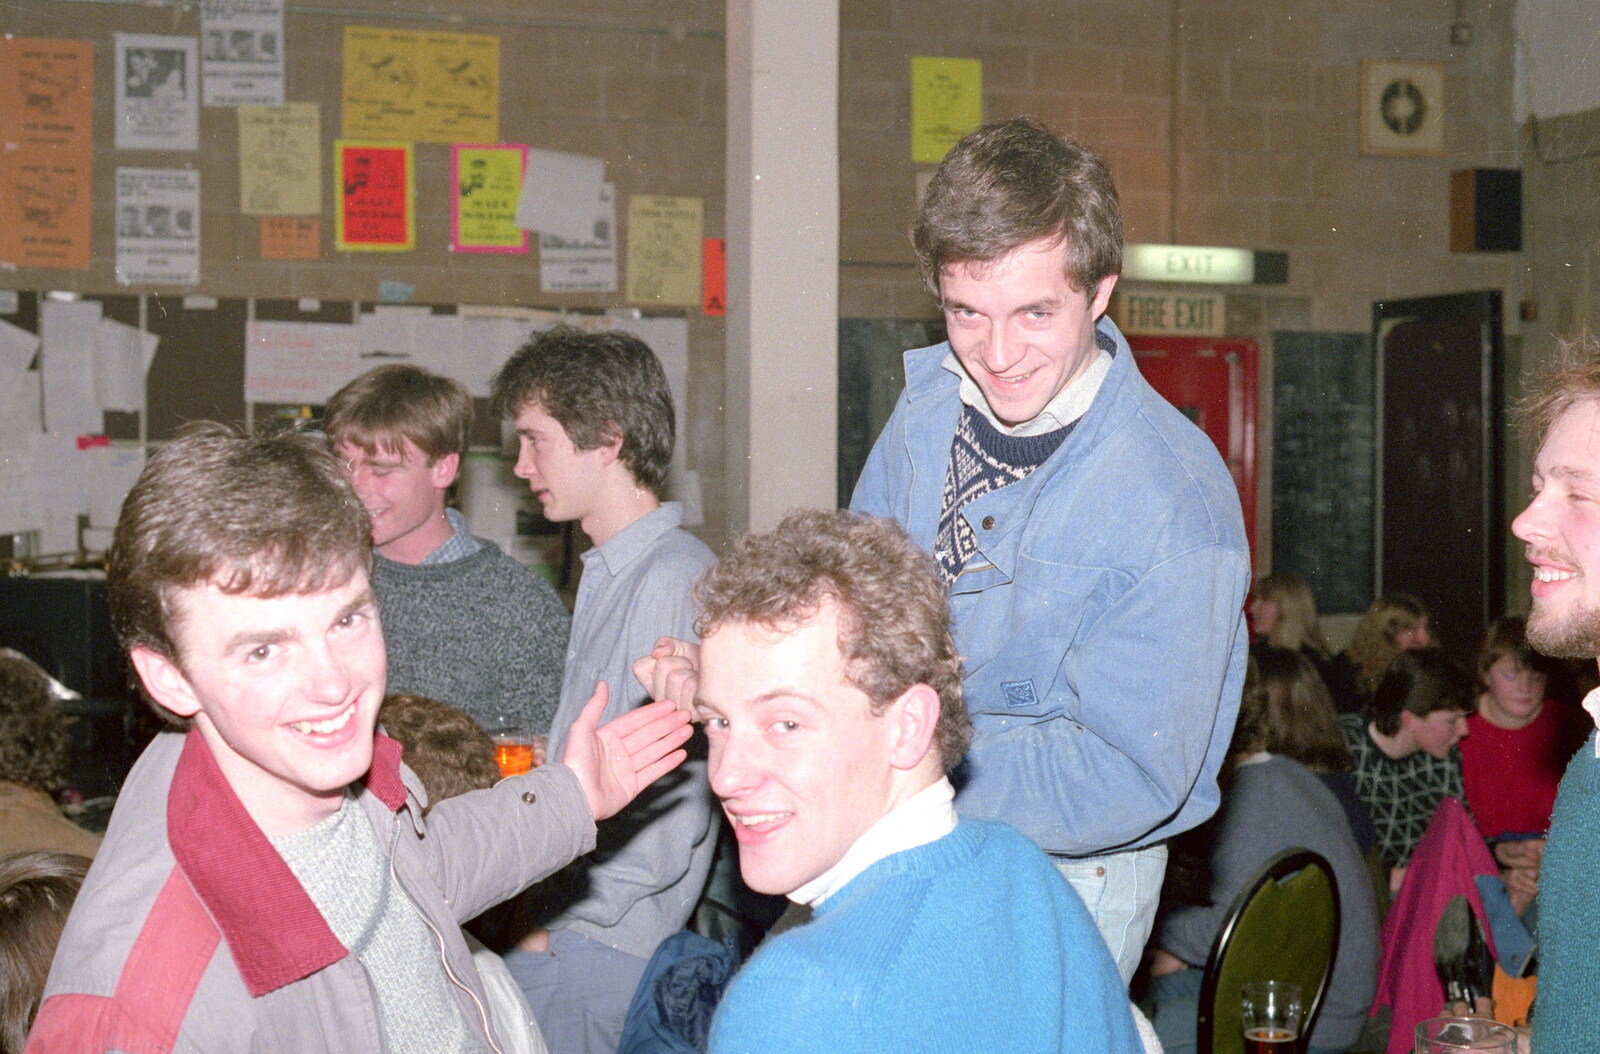 John Stuart and Andy Grove in the SU from Uni: Music Nights and the RAG Ball, Plymouth, Devon - 18th February 1986